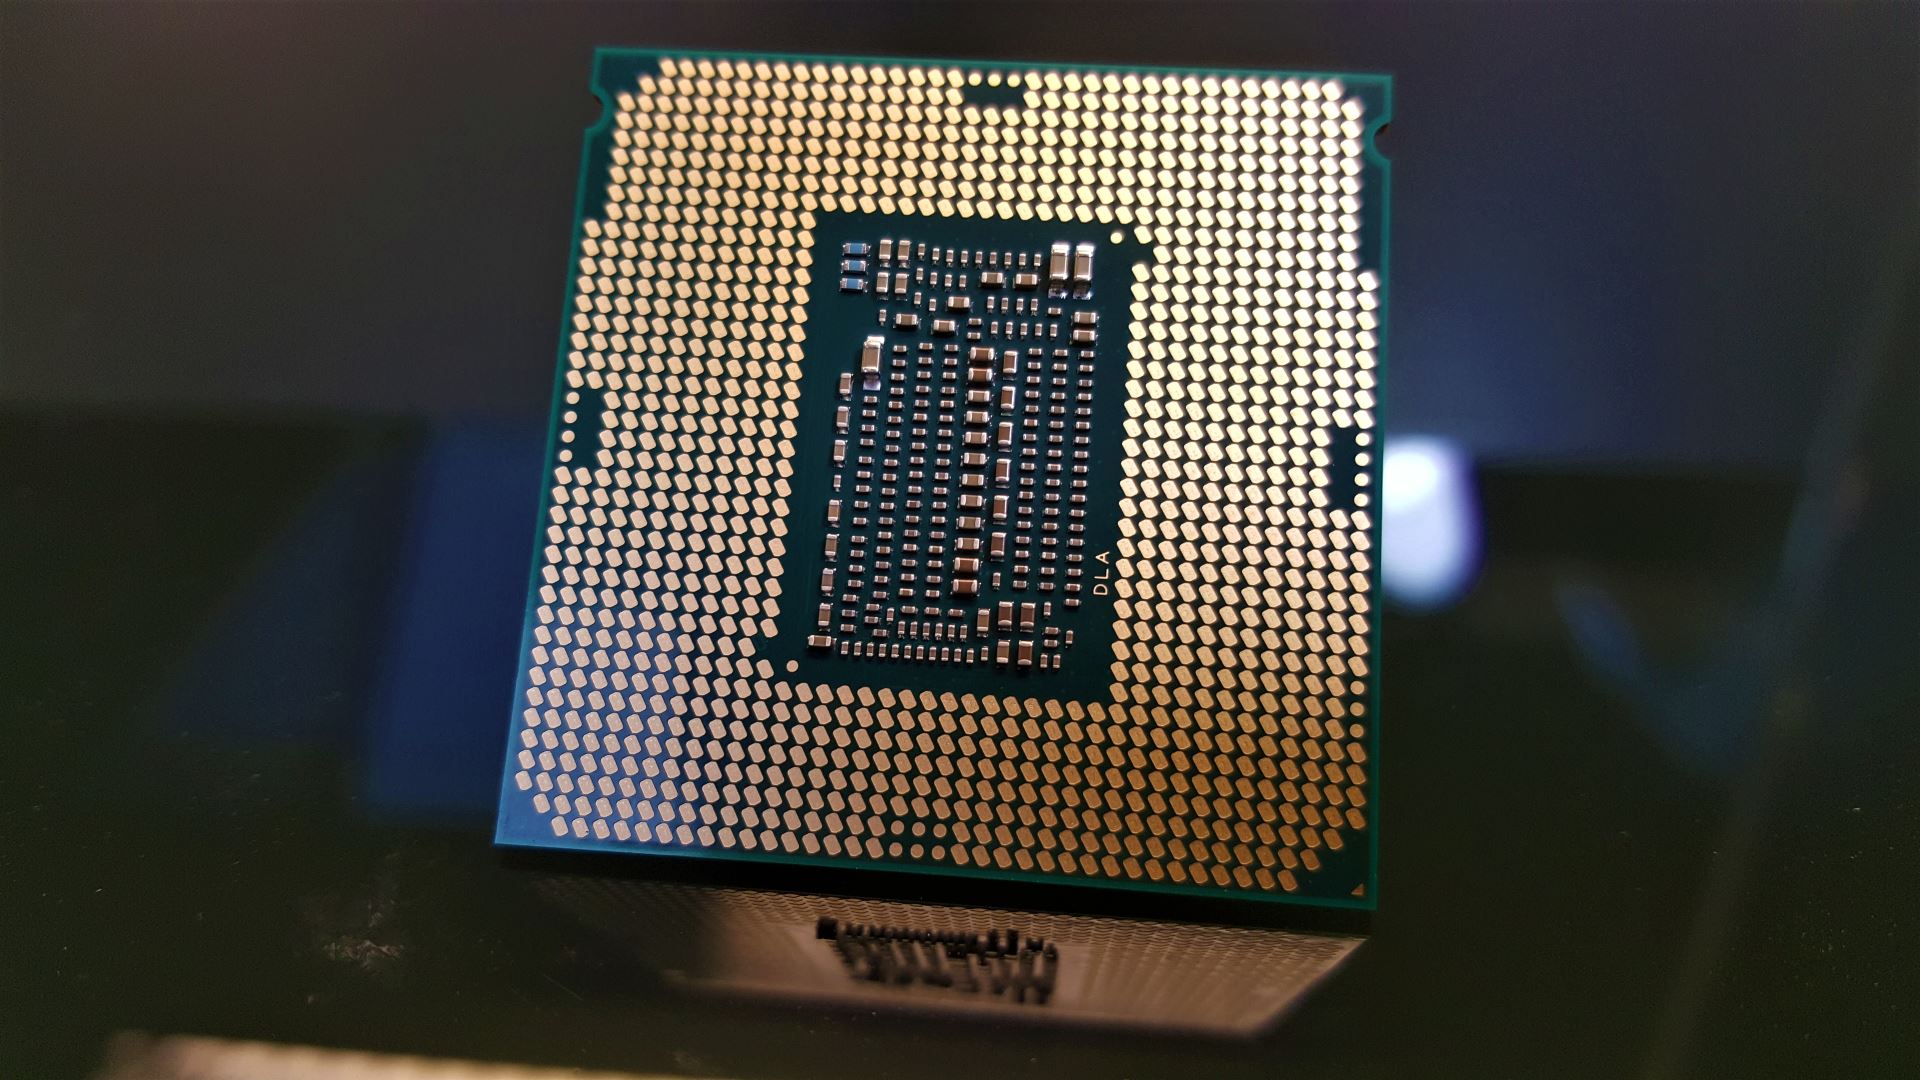 Intel Core i9 9900K review: being the fastest CPU is no longer enough